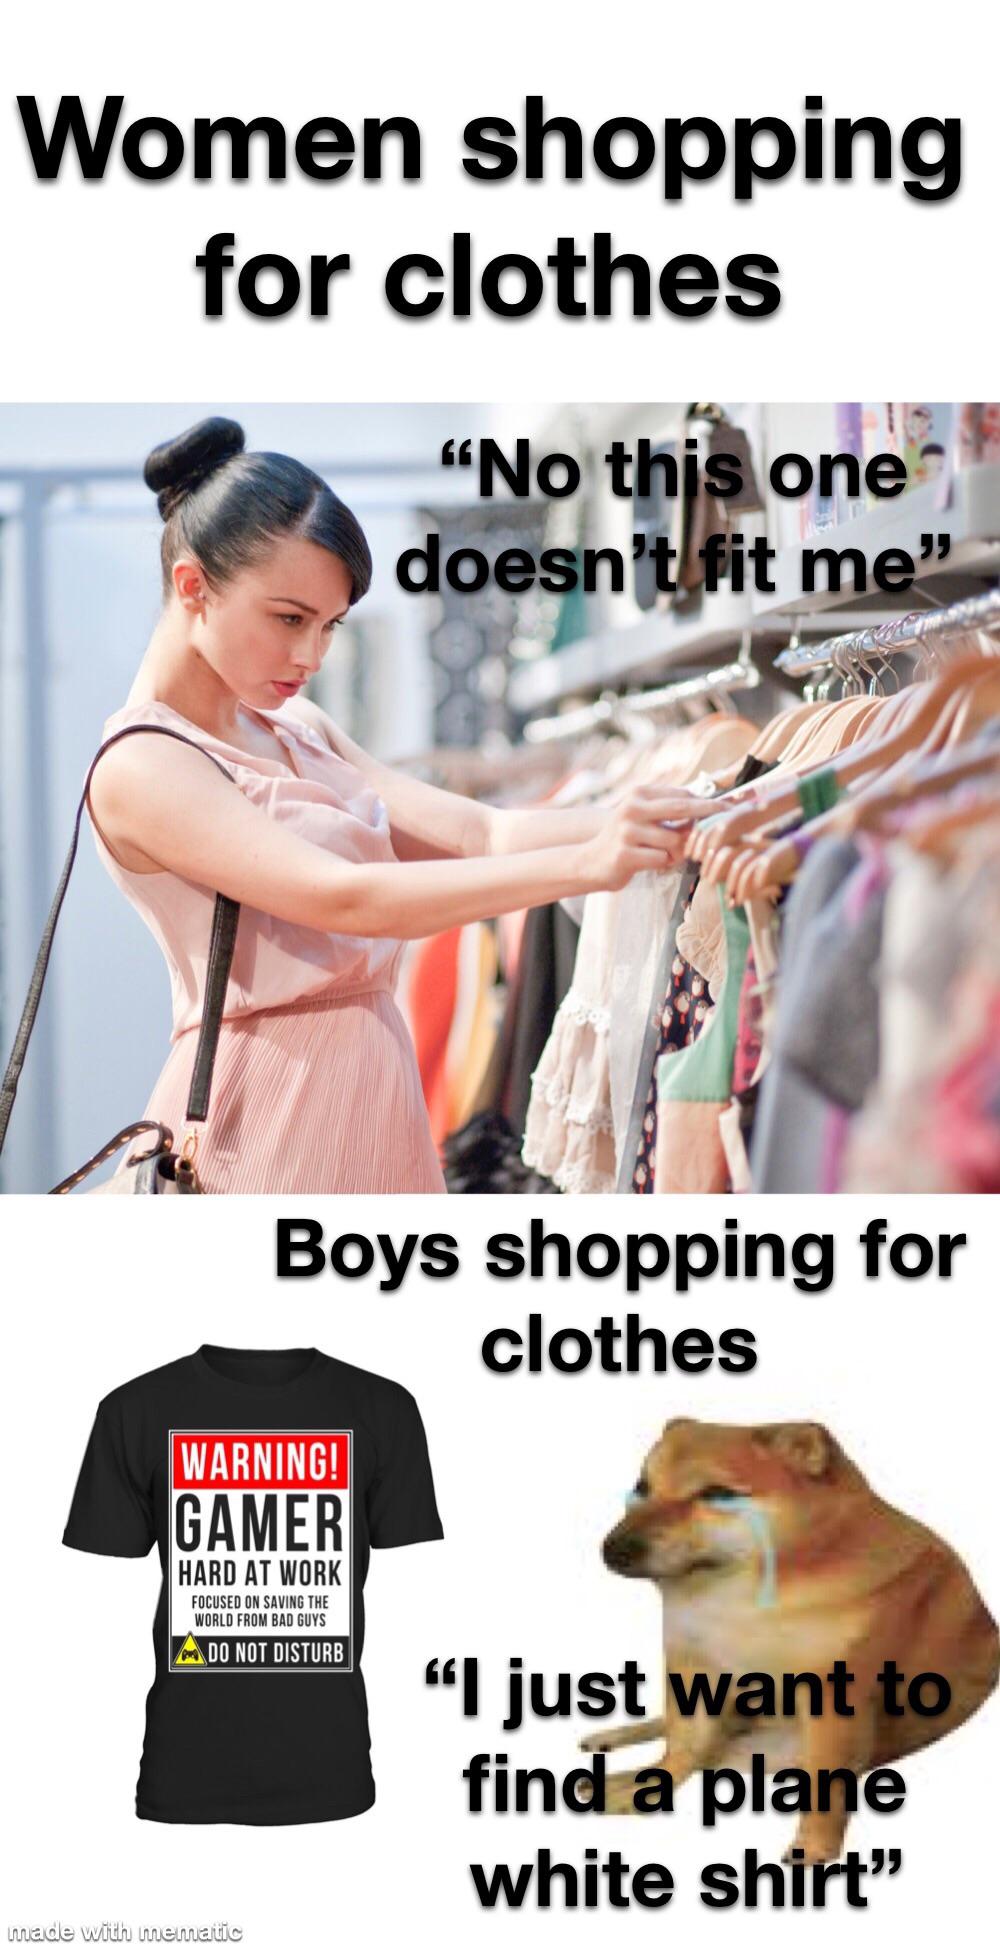 shoulder - Women shopping for clothes "No this one doesn't fit me Boys shopping for clothes Warning! Gamer Hard At Work Focused On Saving The World From Bad Guys Do Not Disturb "I just want to find a plane white shirt" made with mematic